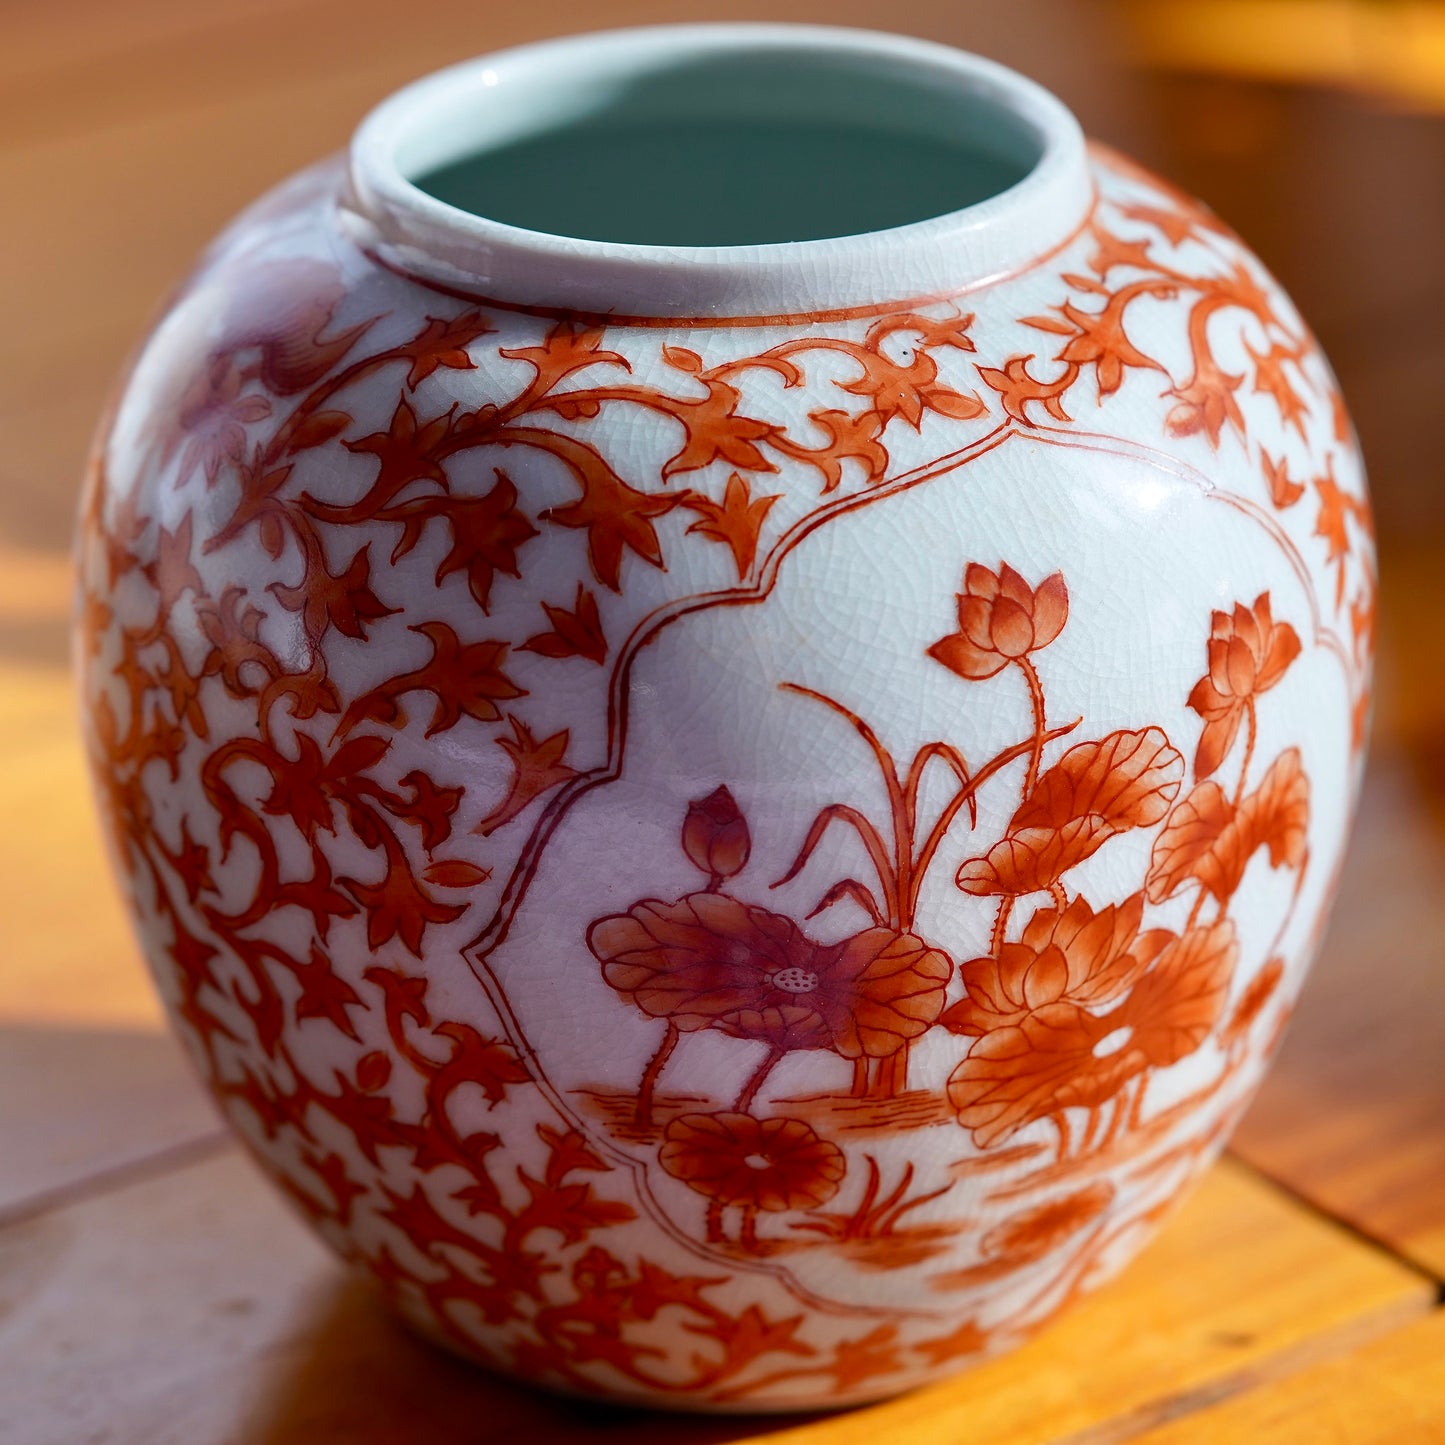 Load image into Gallery viewer, Vintage white and orange handpainted Japanese porcelain vase with flowers, displayed on light wood floor.
